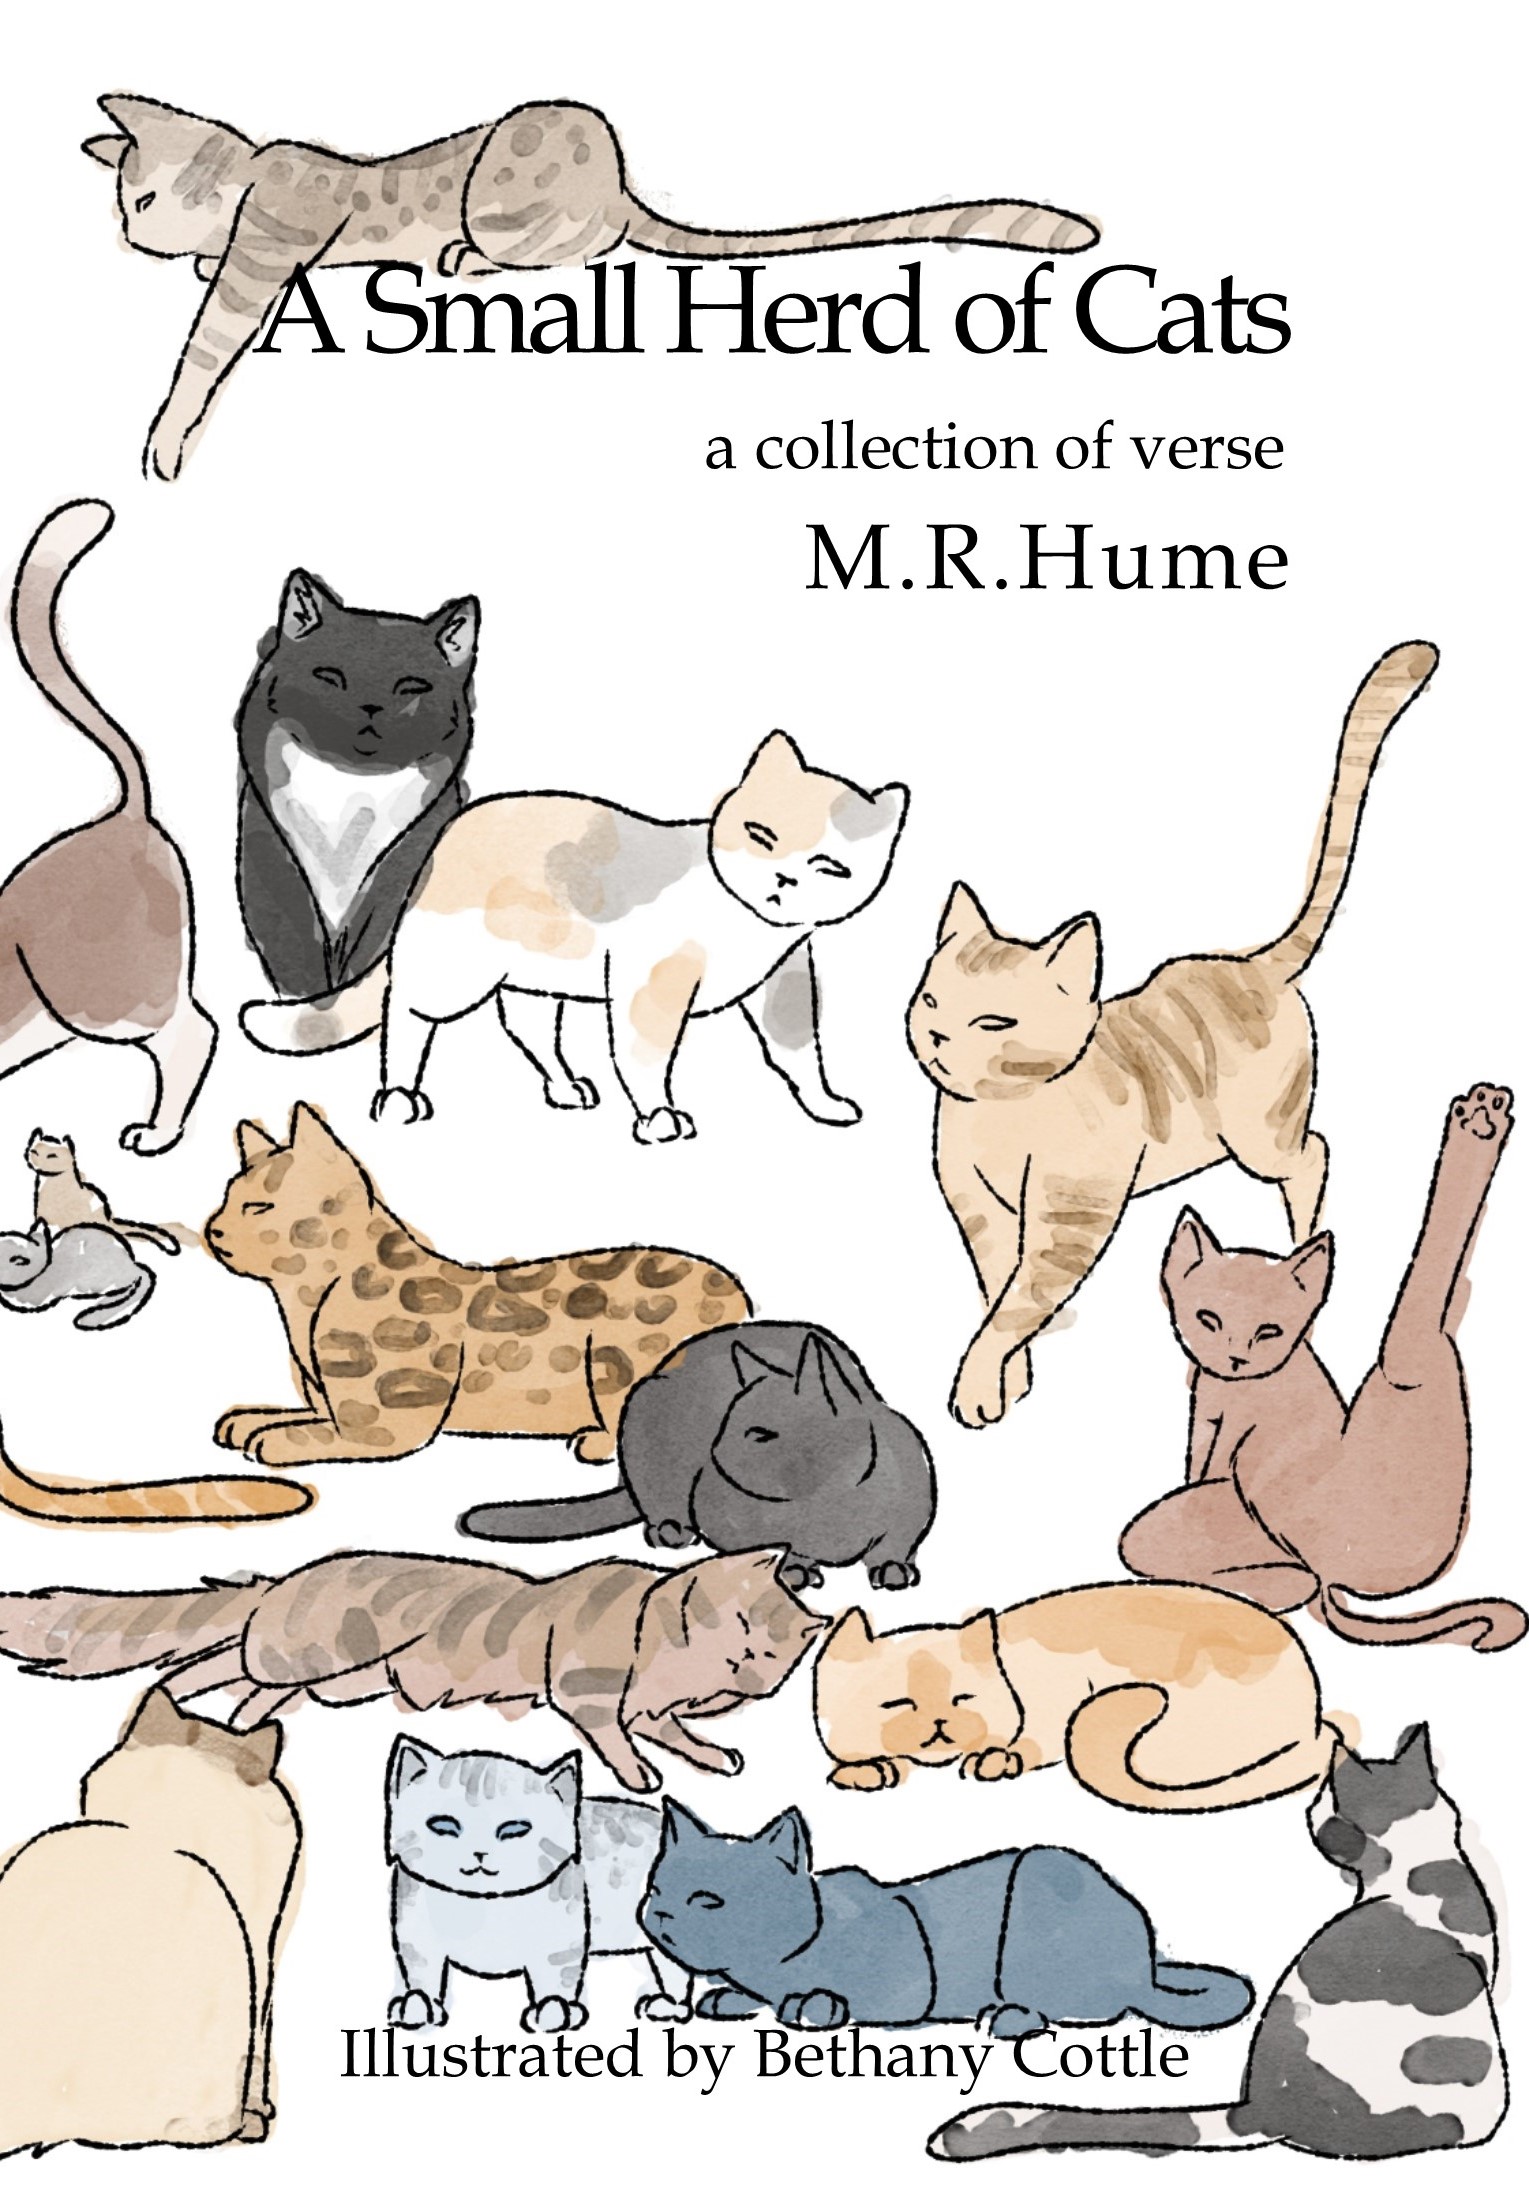 A Small Herd of Cats cover - Copyright M.R. Hume 2019